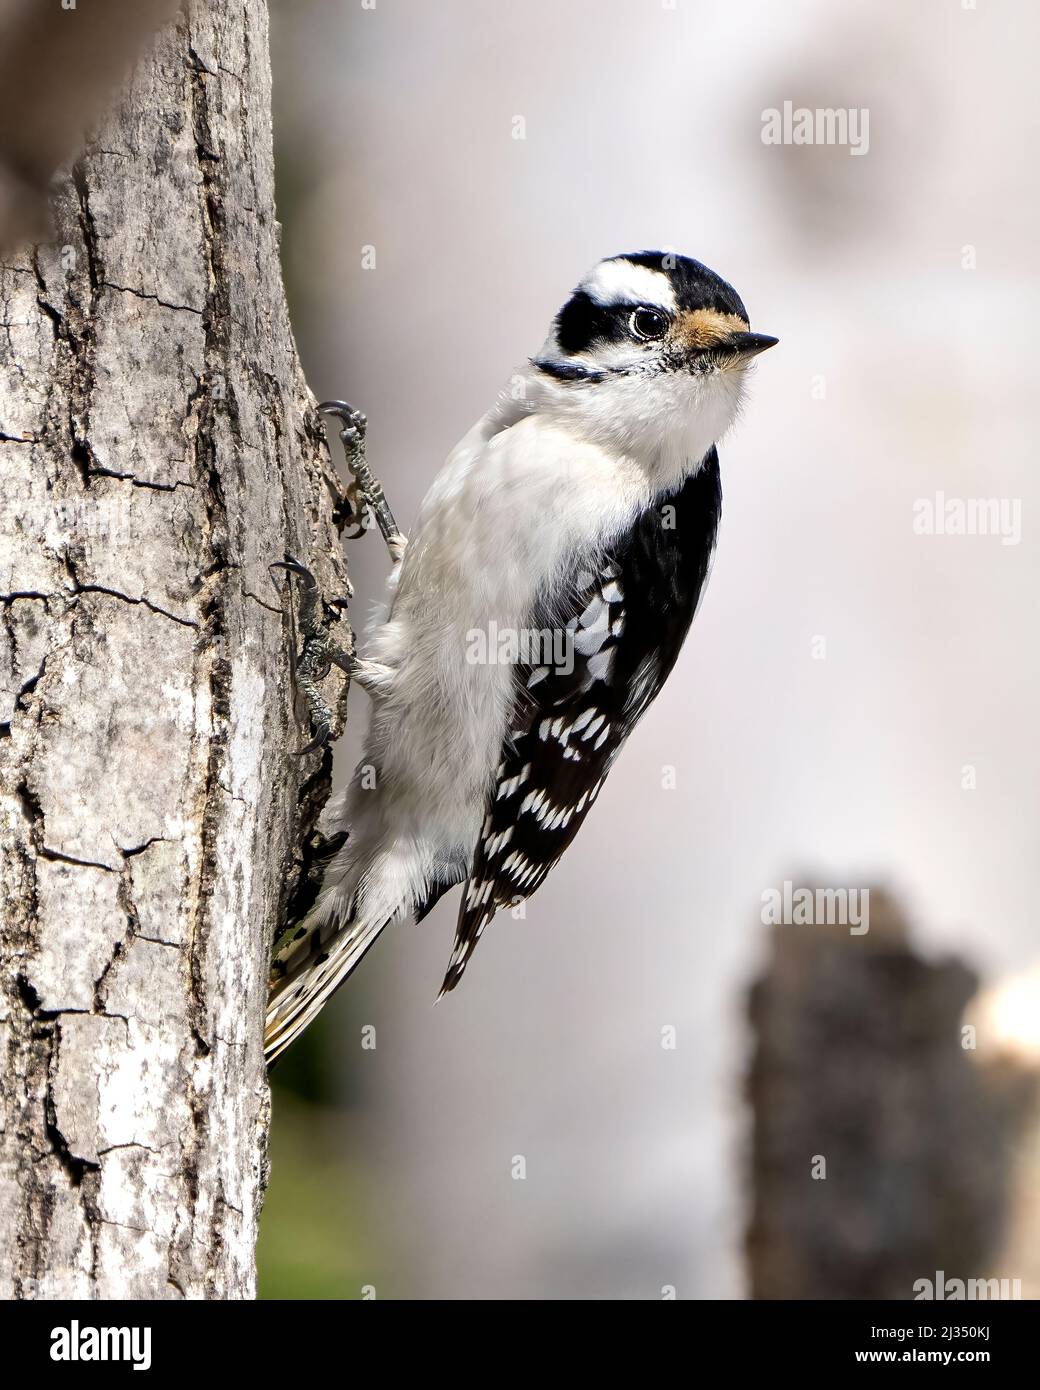 Downy Woodpecker male on a tree trunk with a blur background in its environment and habitat surrounding displaying white and black feather plumage. Stock Photo